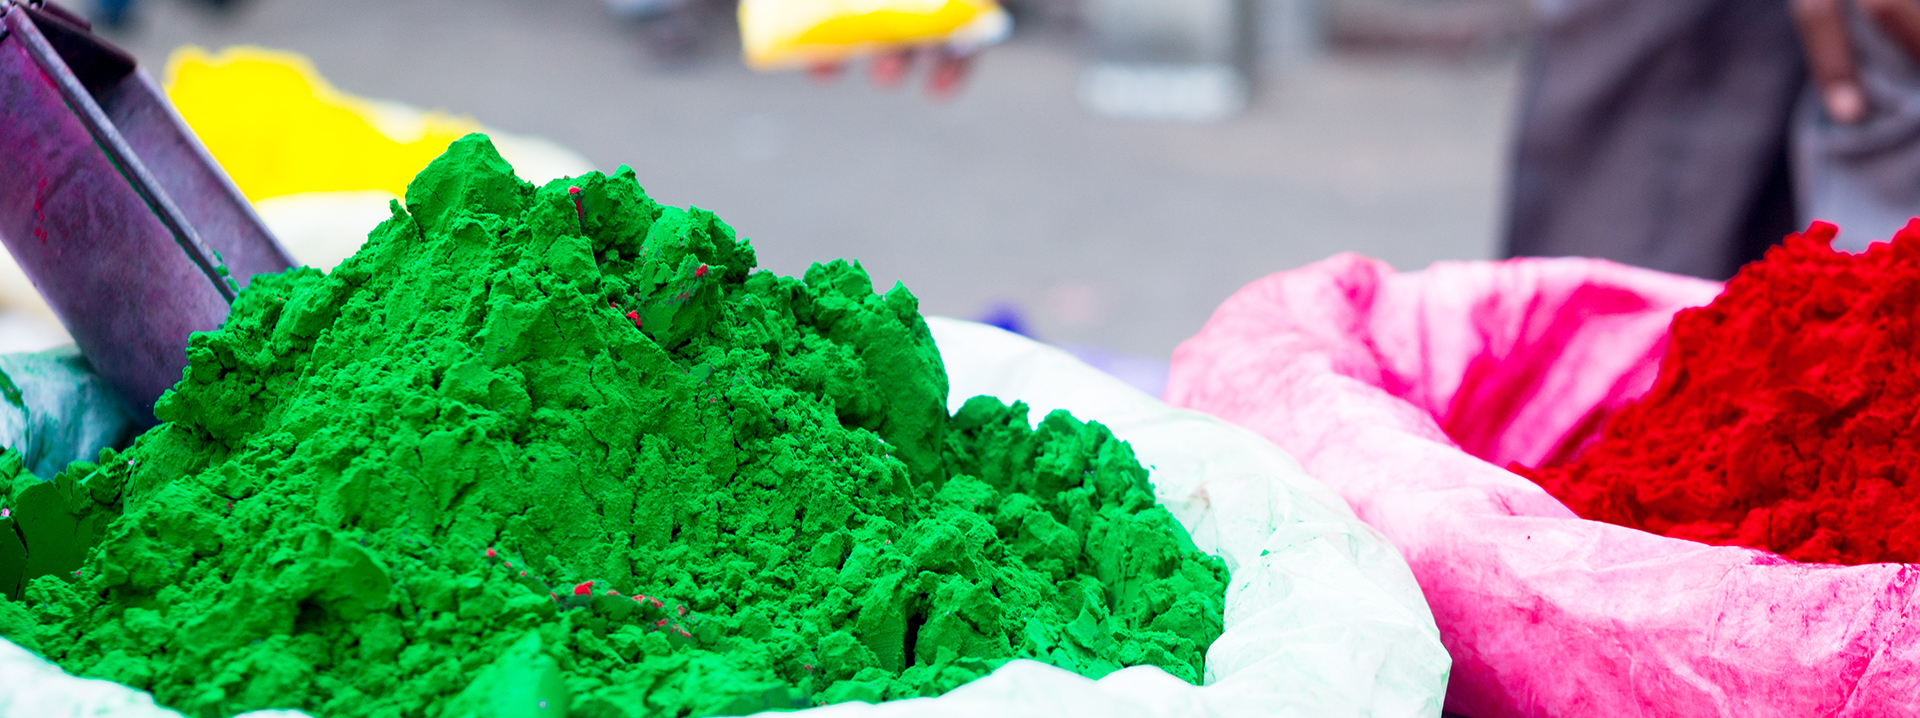 The History of Pigments